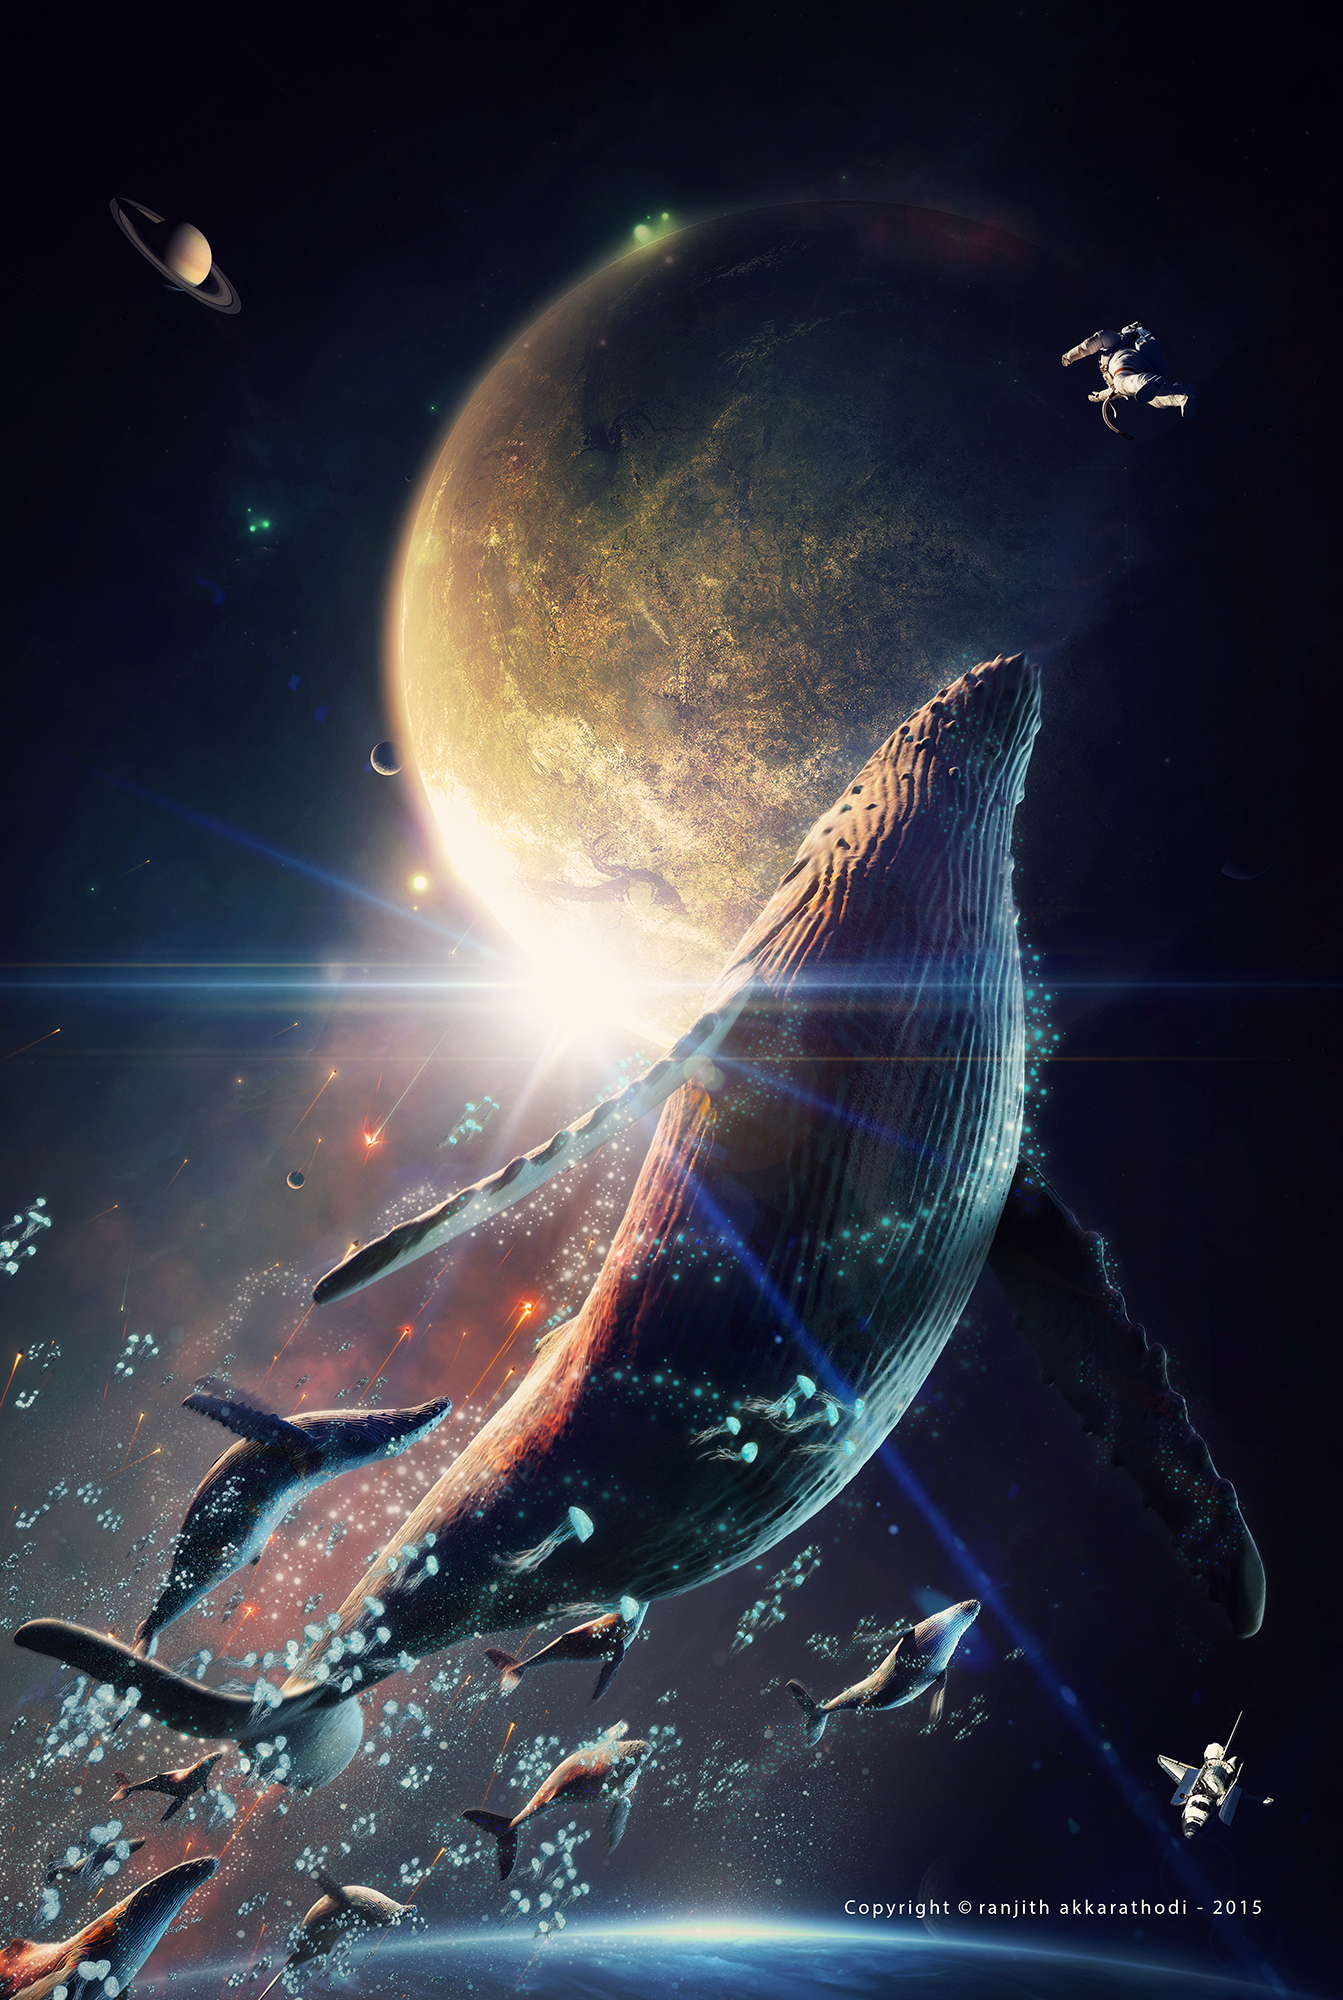 the-astronaut-and-the-chiliad-of-whales-the-origin-of-reality